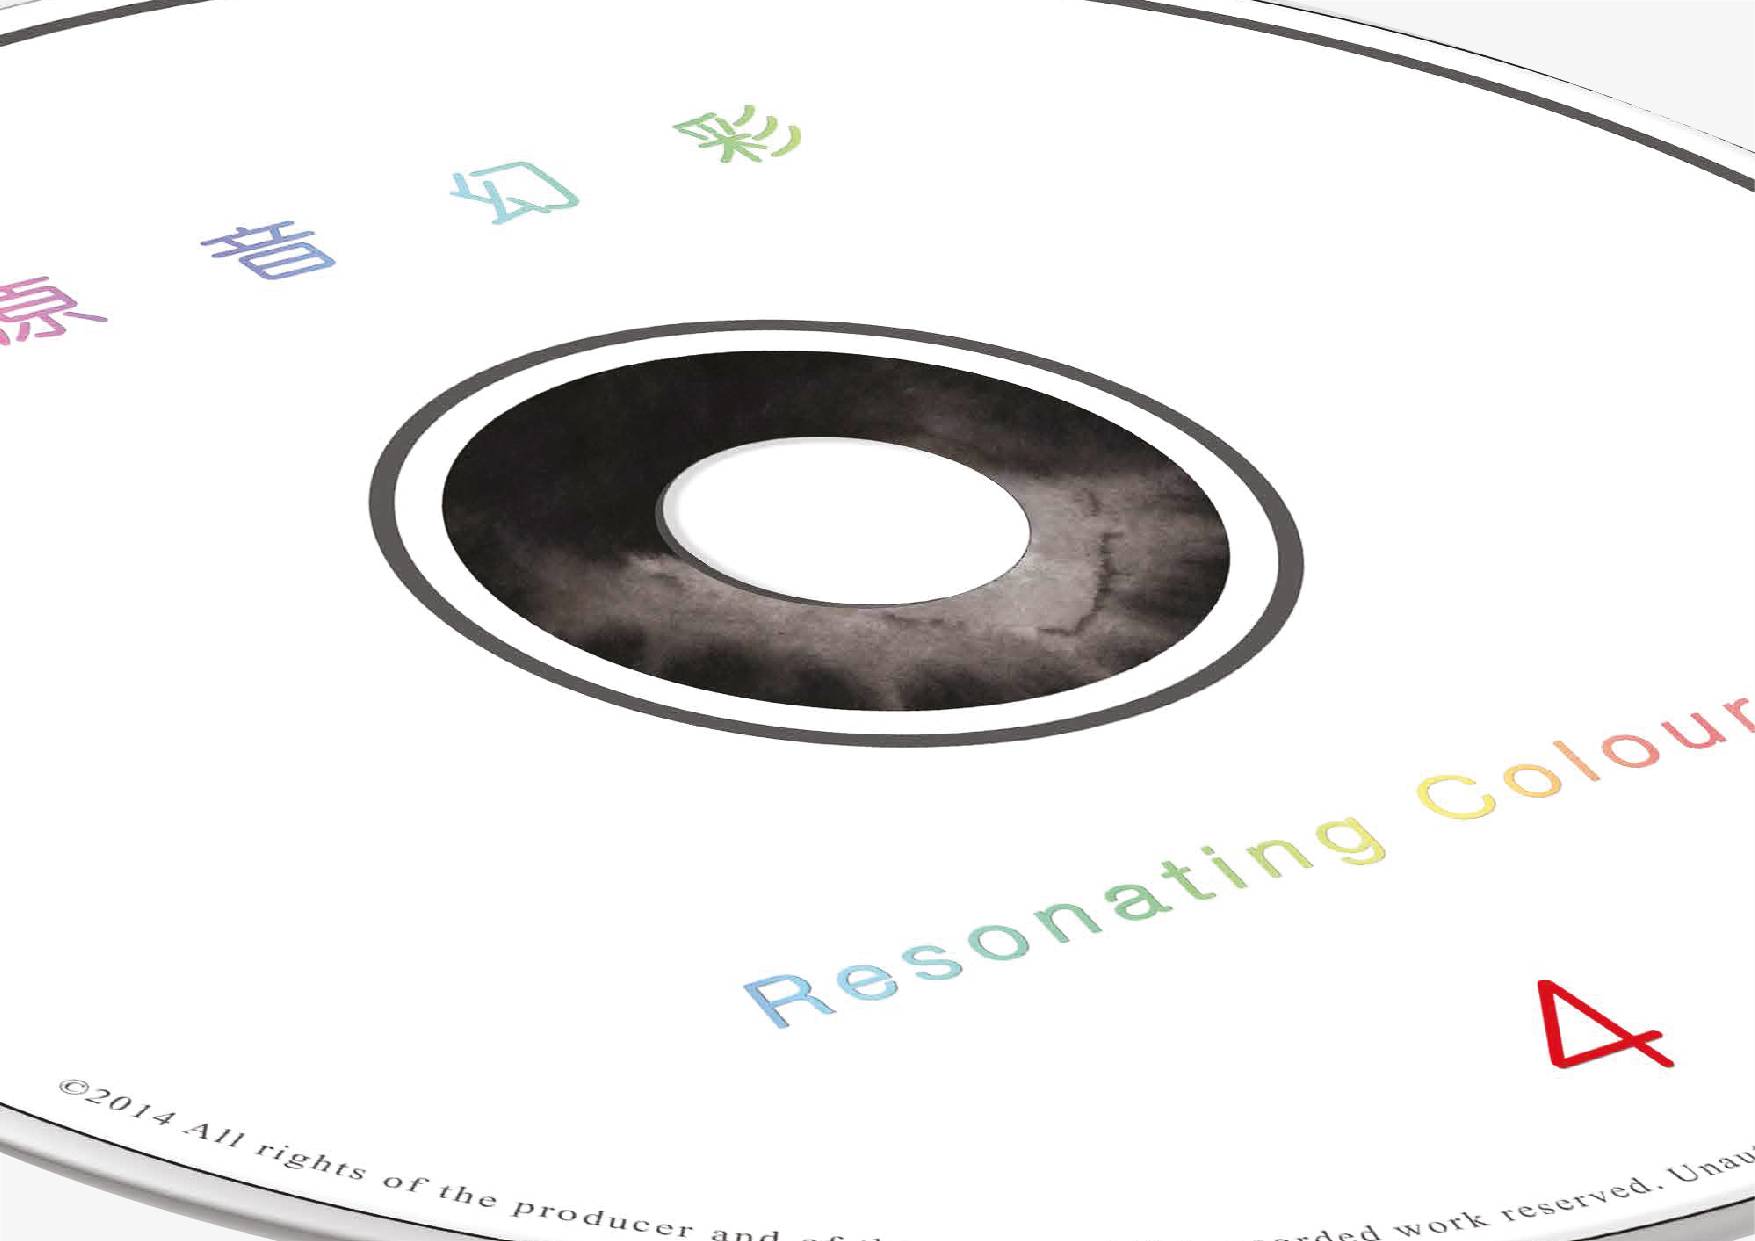 Hong Kong Composers Guild CD Album design for a disc with colouring text